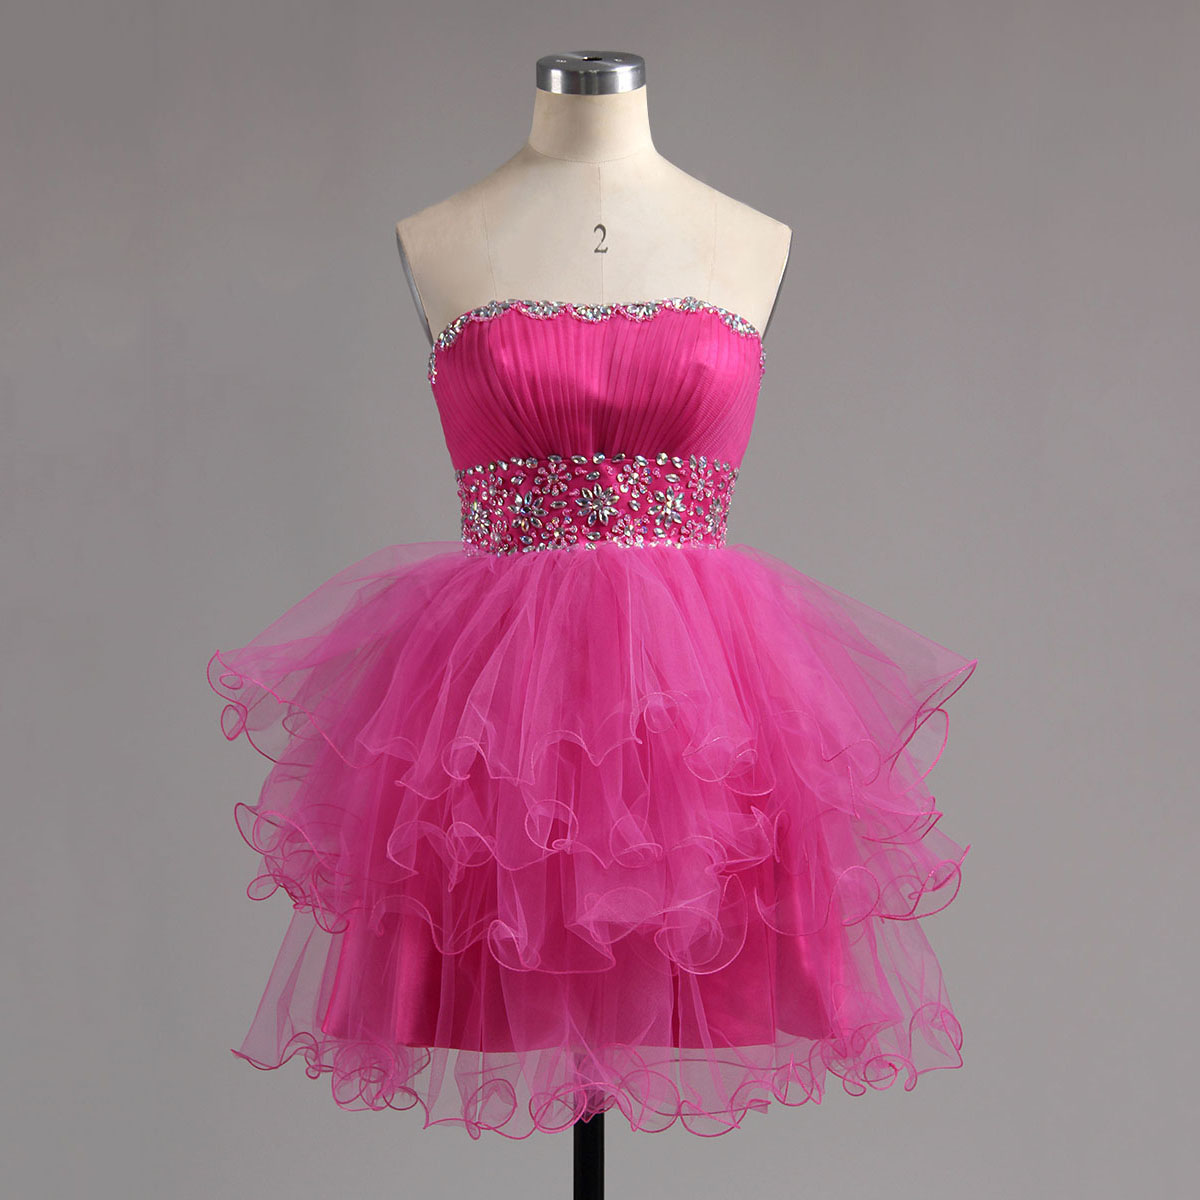 Strapless Pink Homecoming Dress with Beaded Belt, Tulle Lace-up Homecoming Dress, Royal Blue Mini Ruffles Homecoming Dress